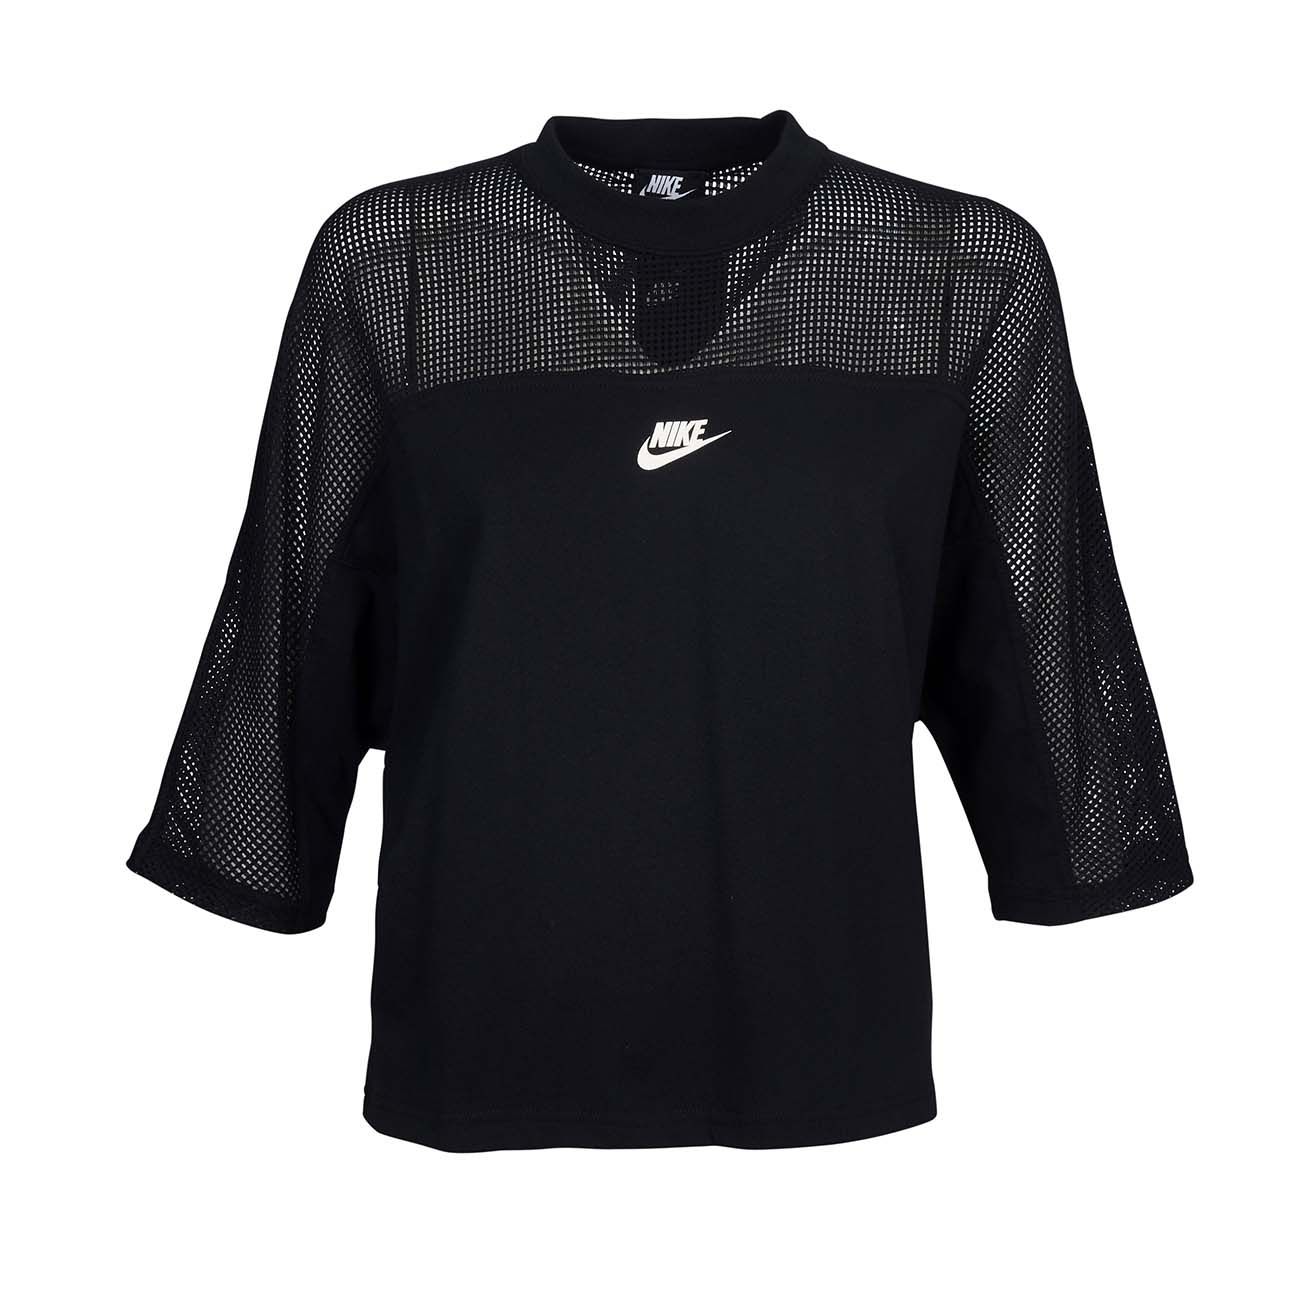 NIKE PERFORATED T-SHIRT WITH LOGO Woman 